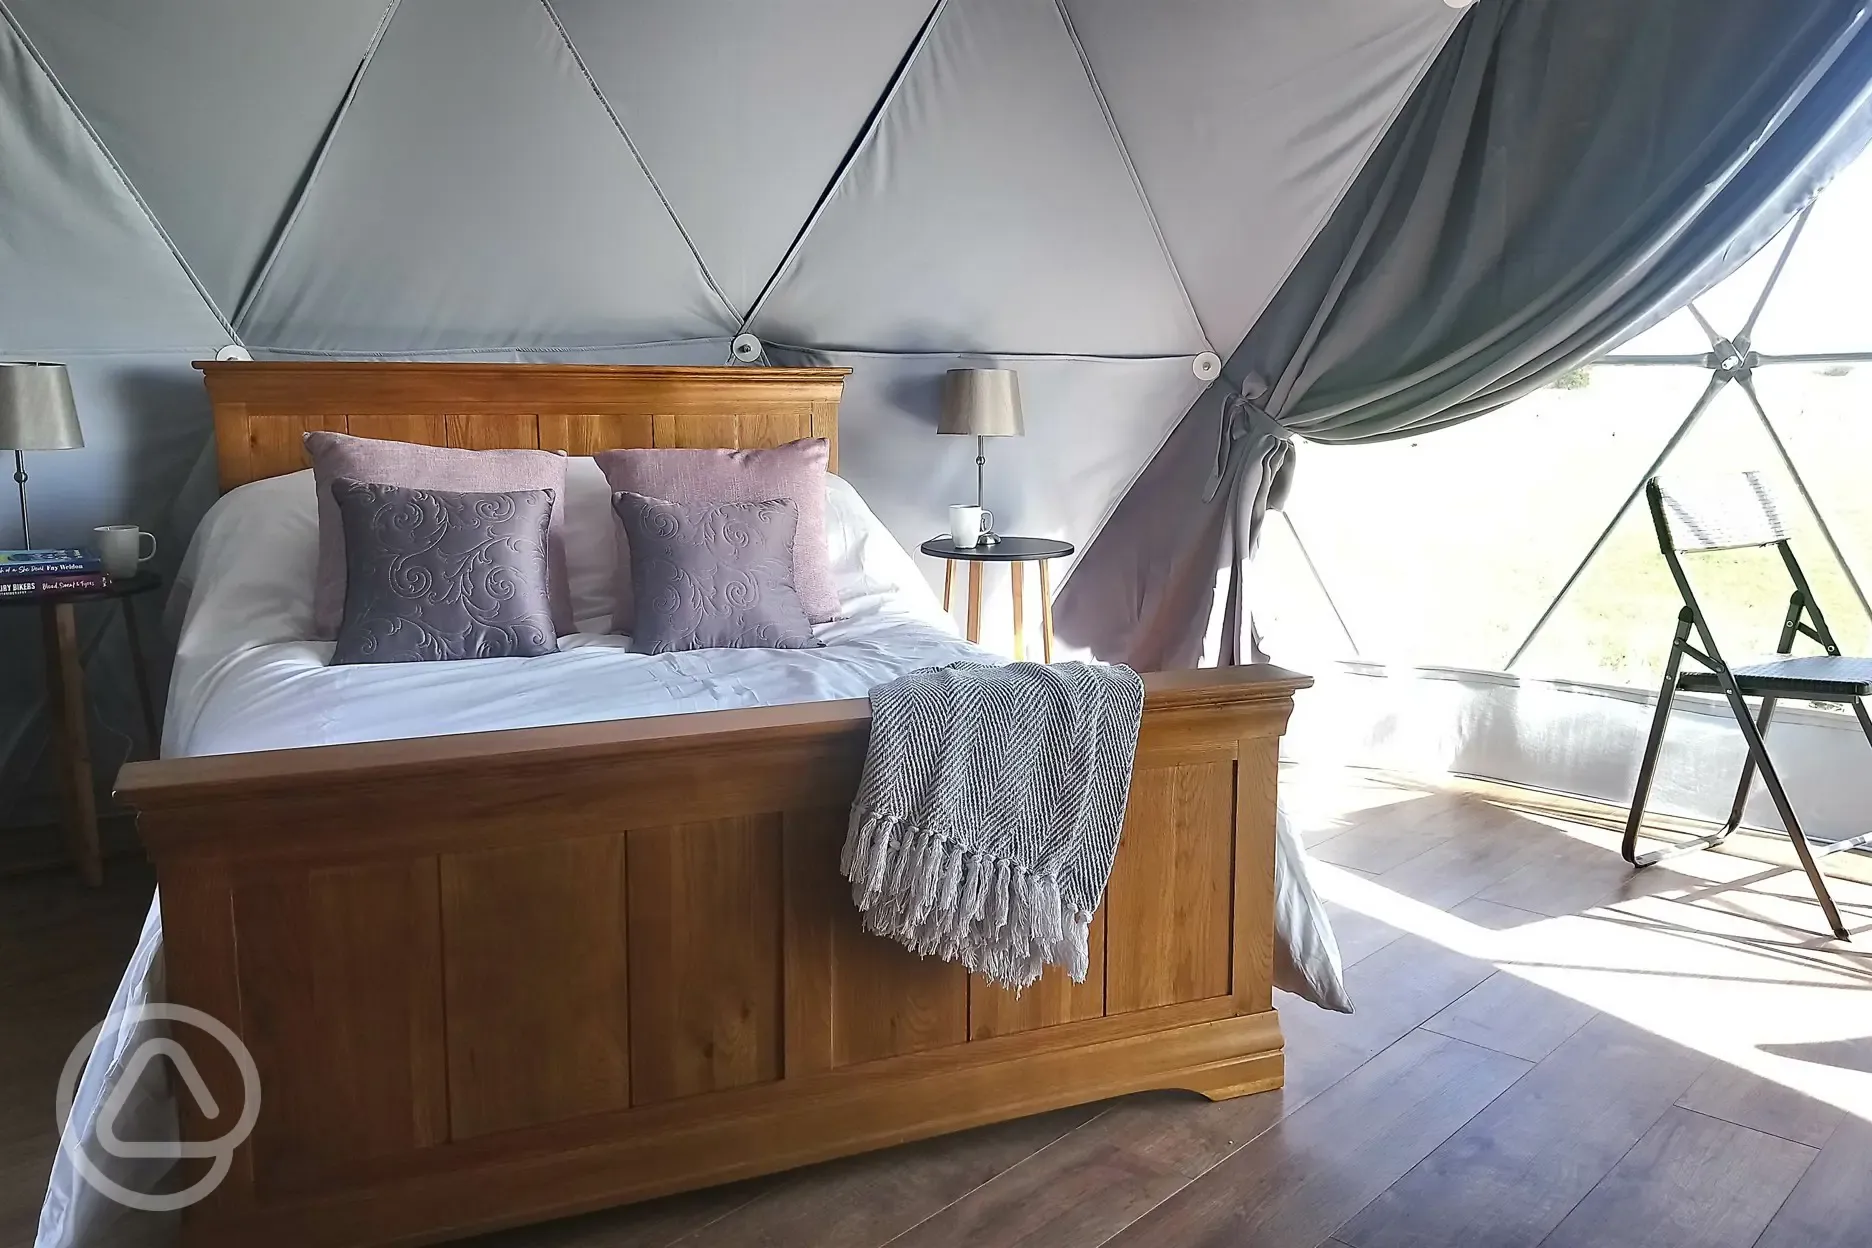 The Glamping dome interior